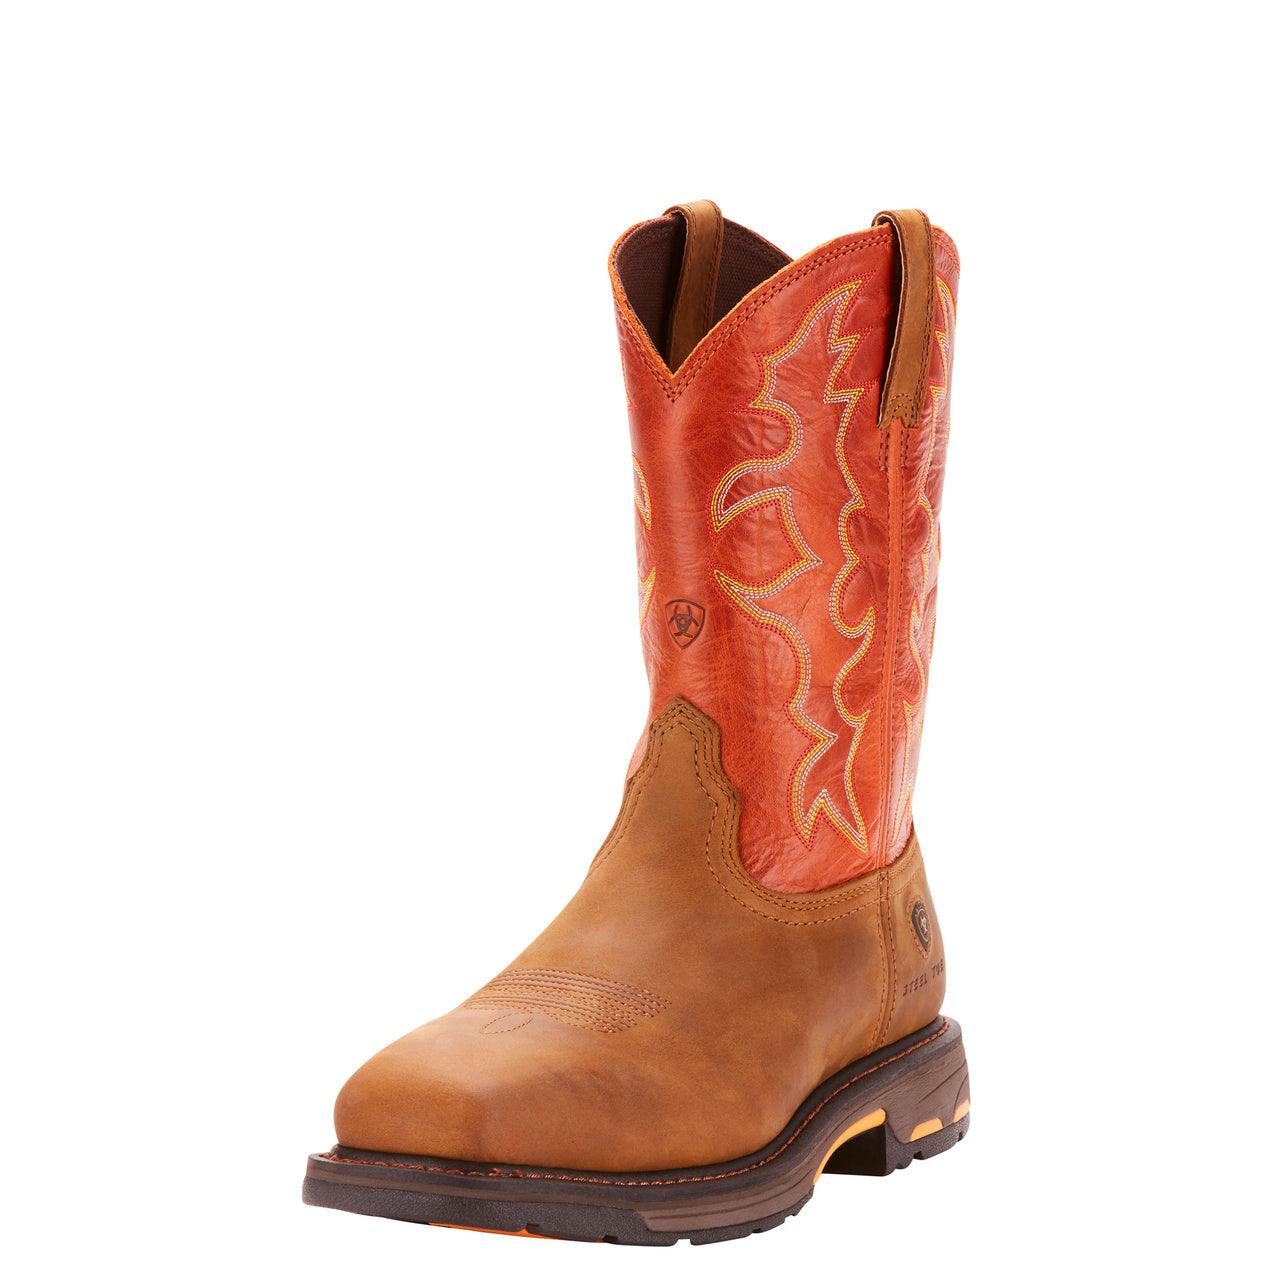 Ariat Workhog Wide Square Toe Boot 11.5 EE